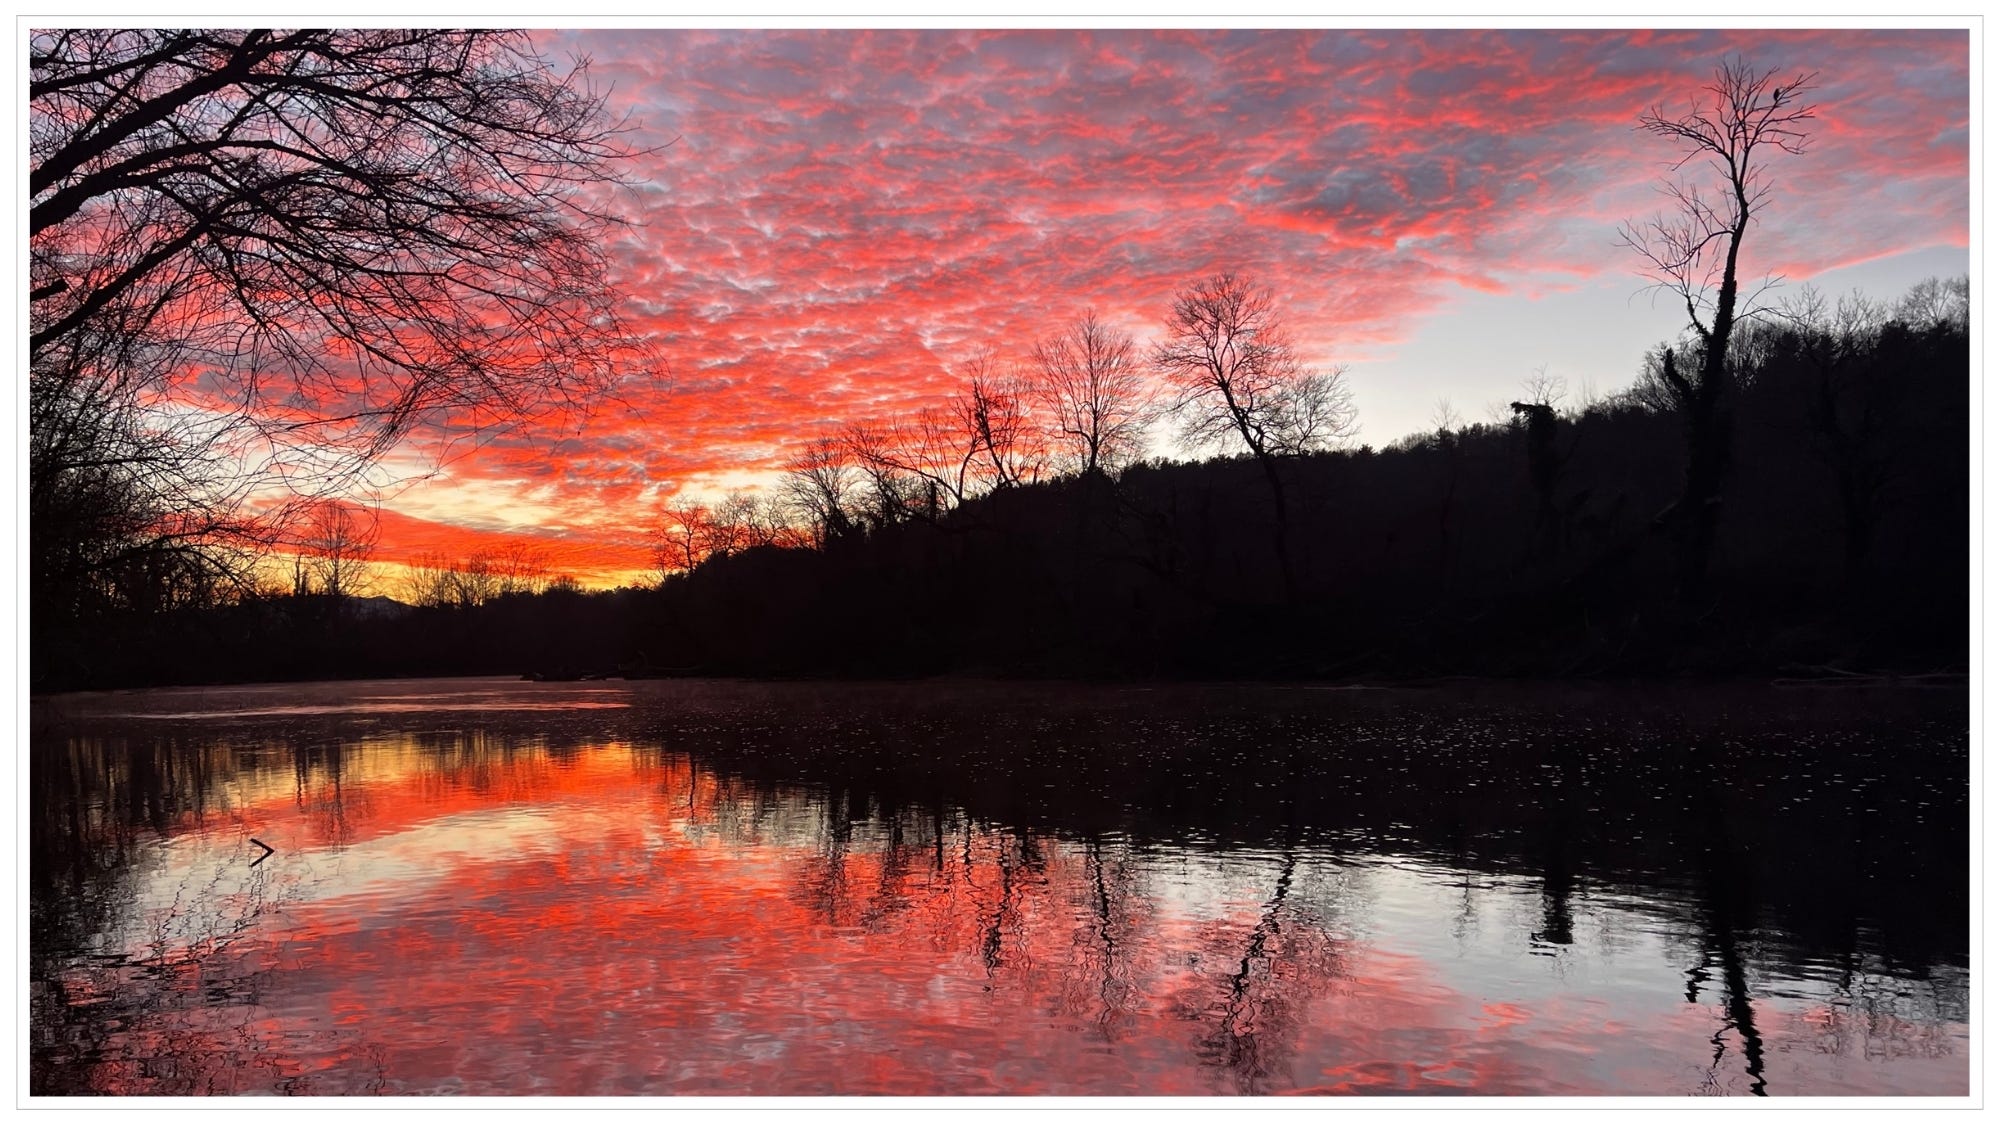 Bright red textured sky at dawn, red reflection in river